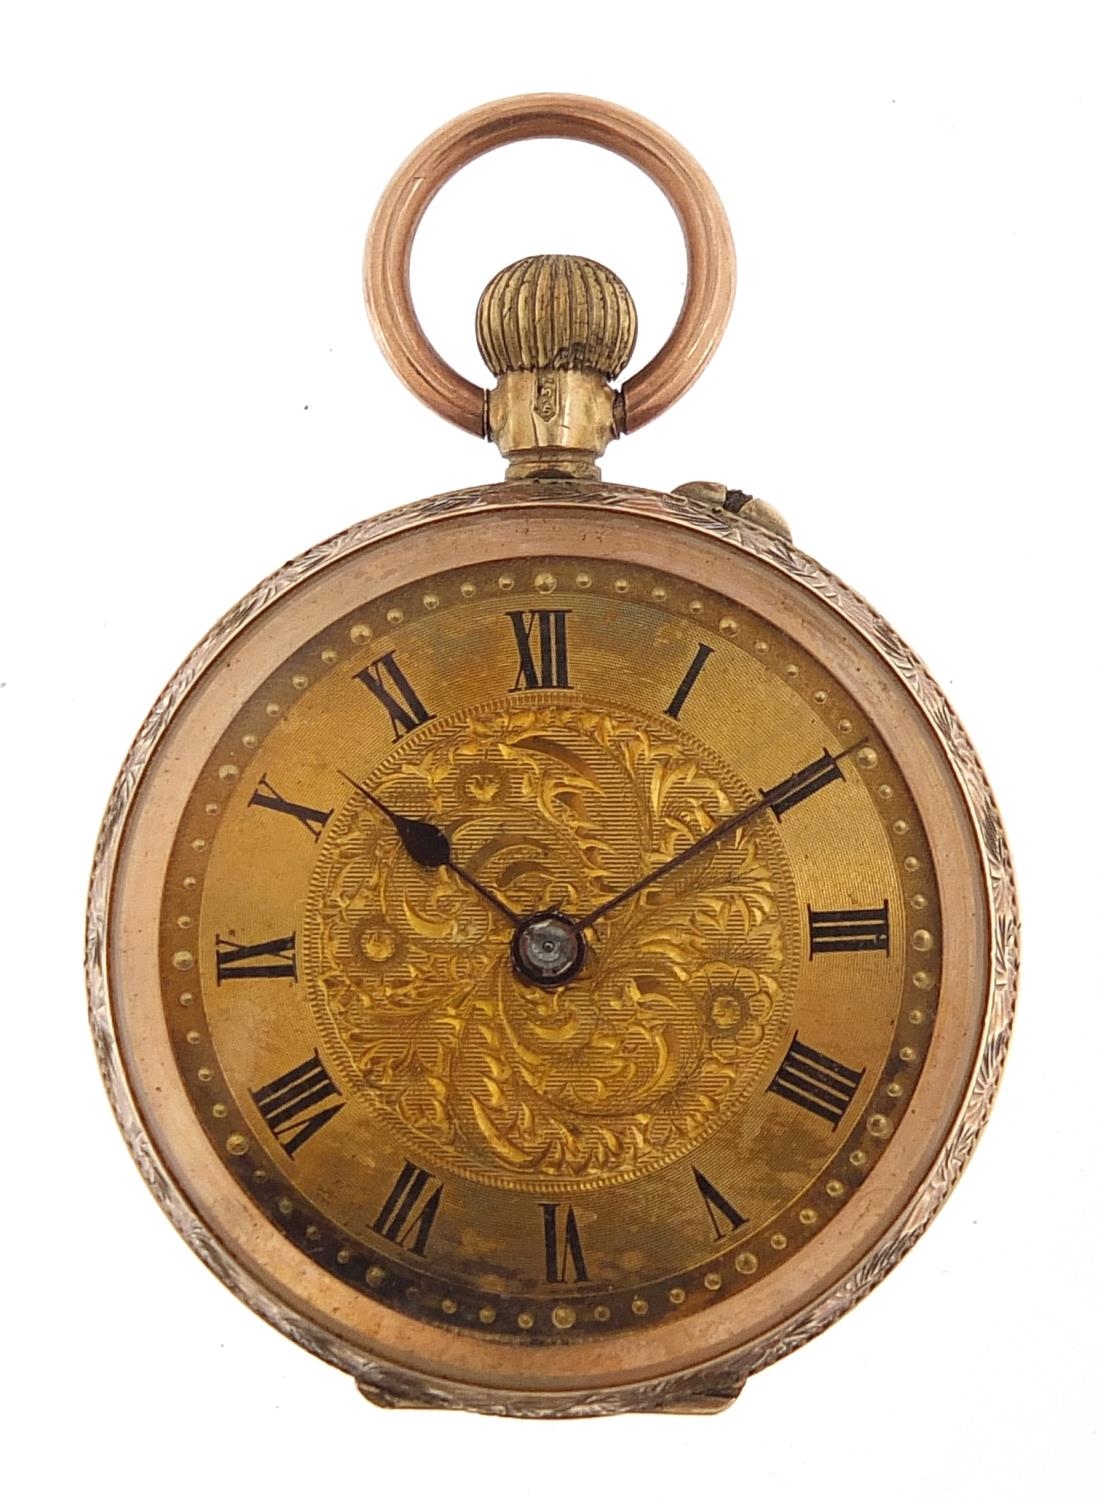 Ladies 9ct rose gold pocket watch with ornate dial, 32mm in diameter, 22.5g